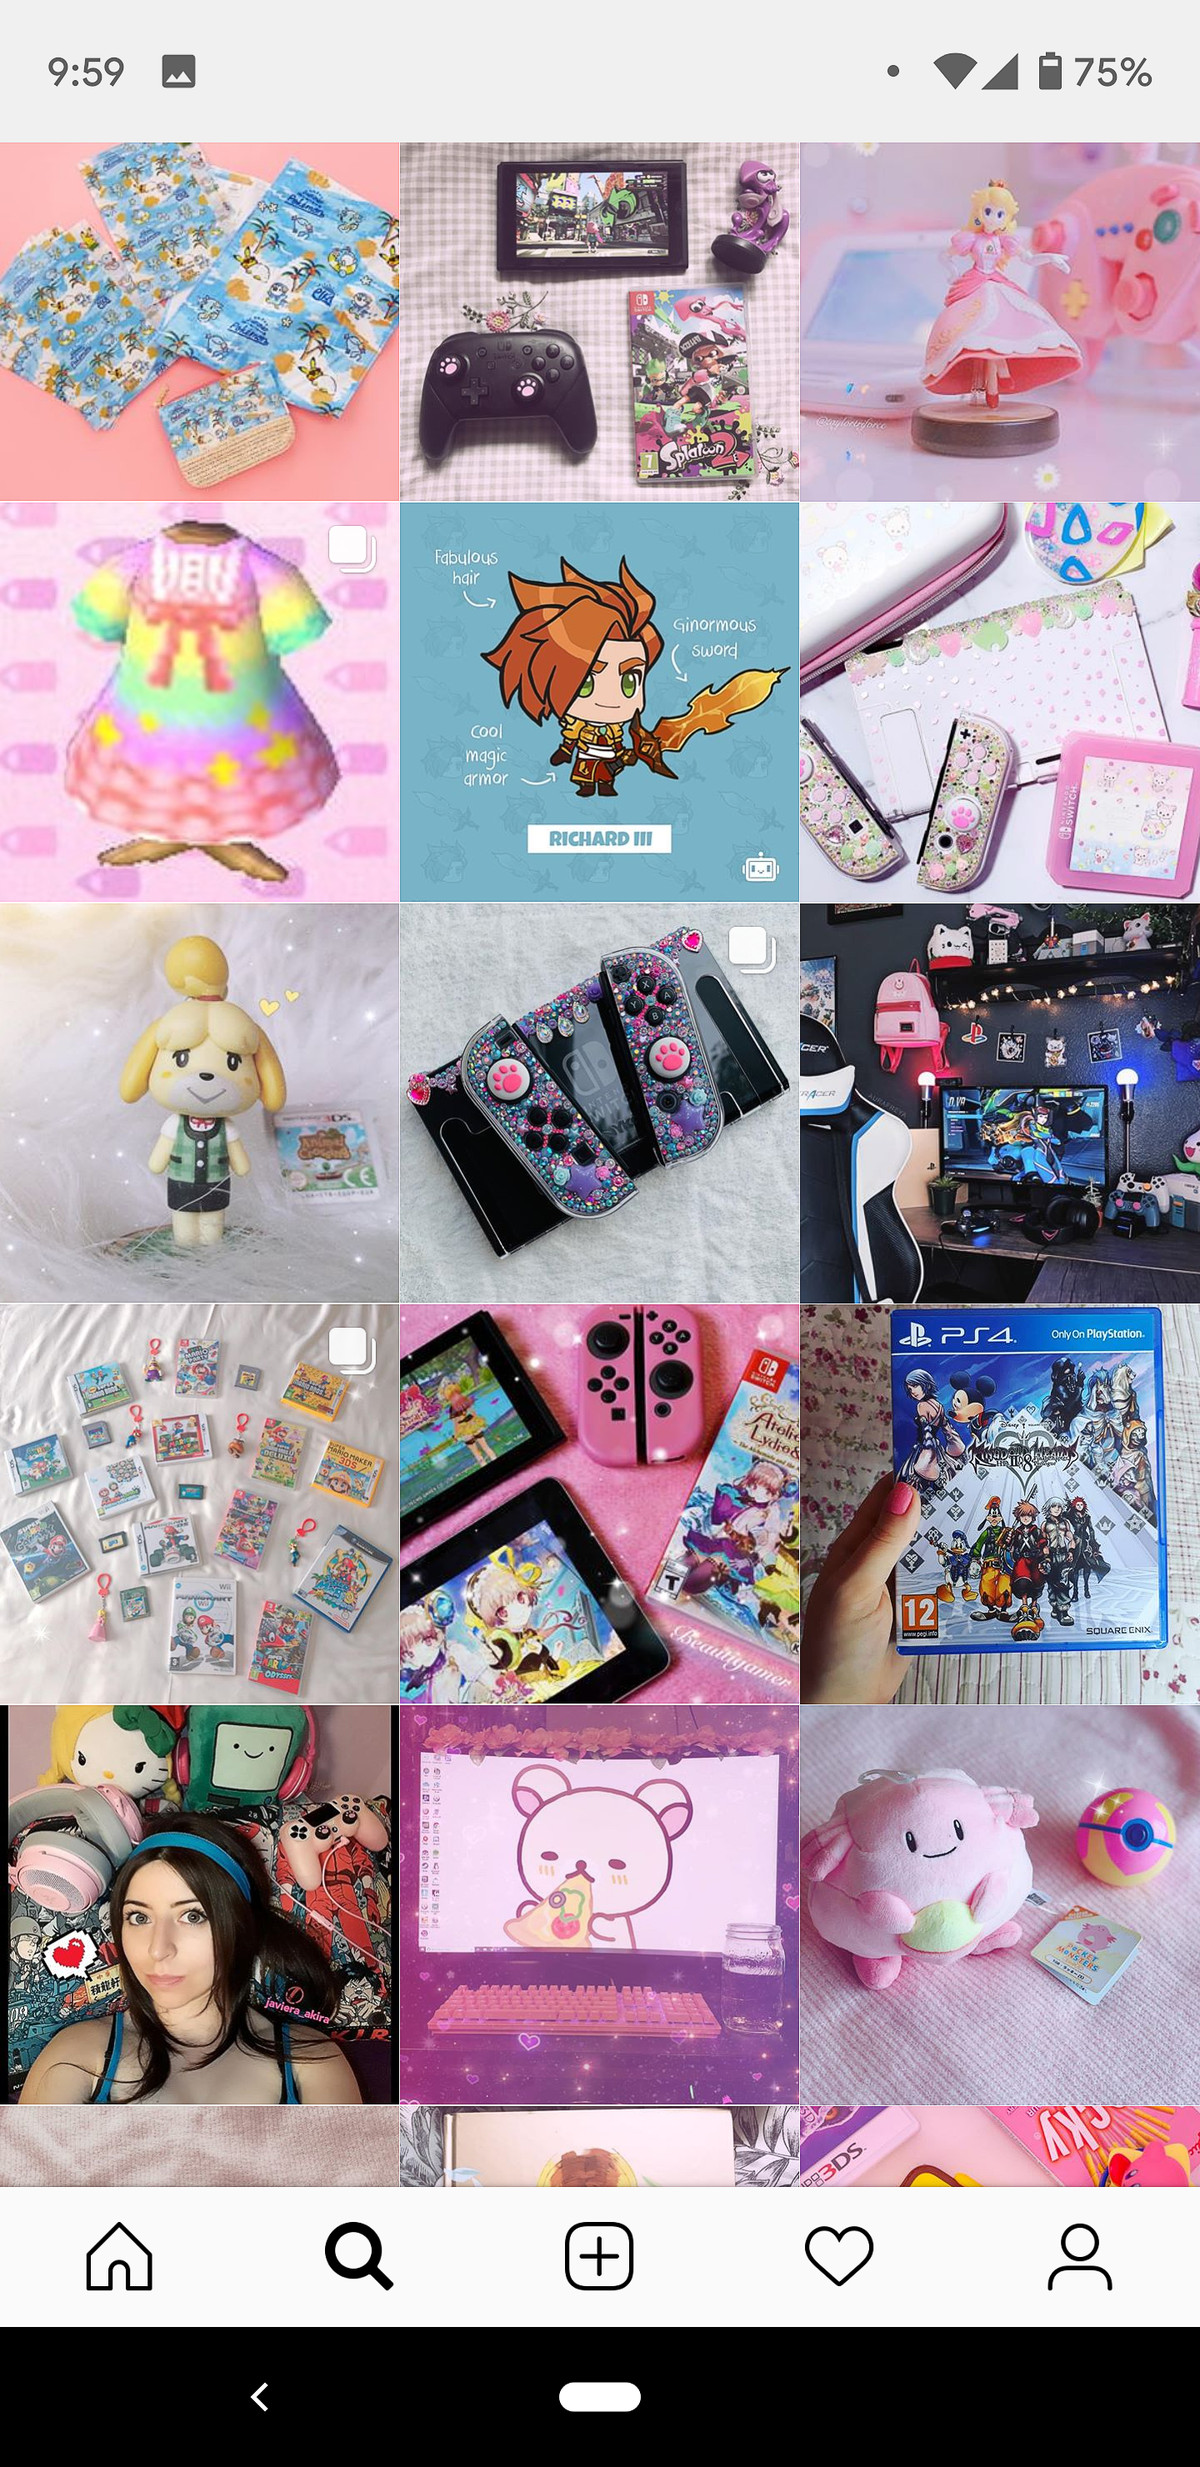 Screen grab from Instagram featuring images tagged #kawaiigamer hashtag